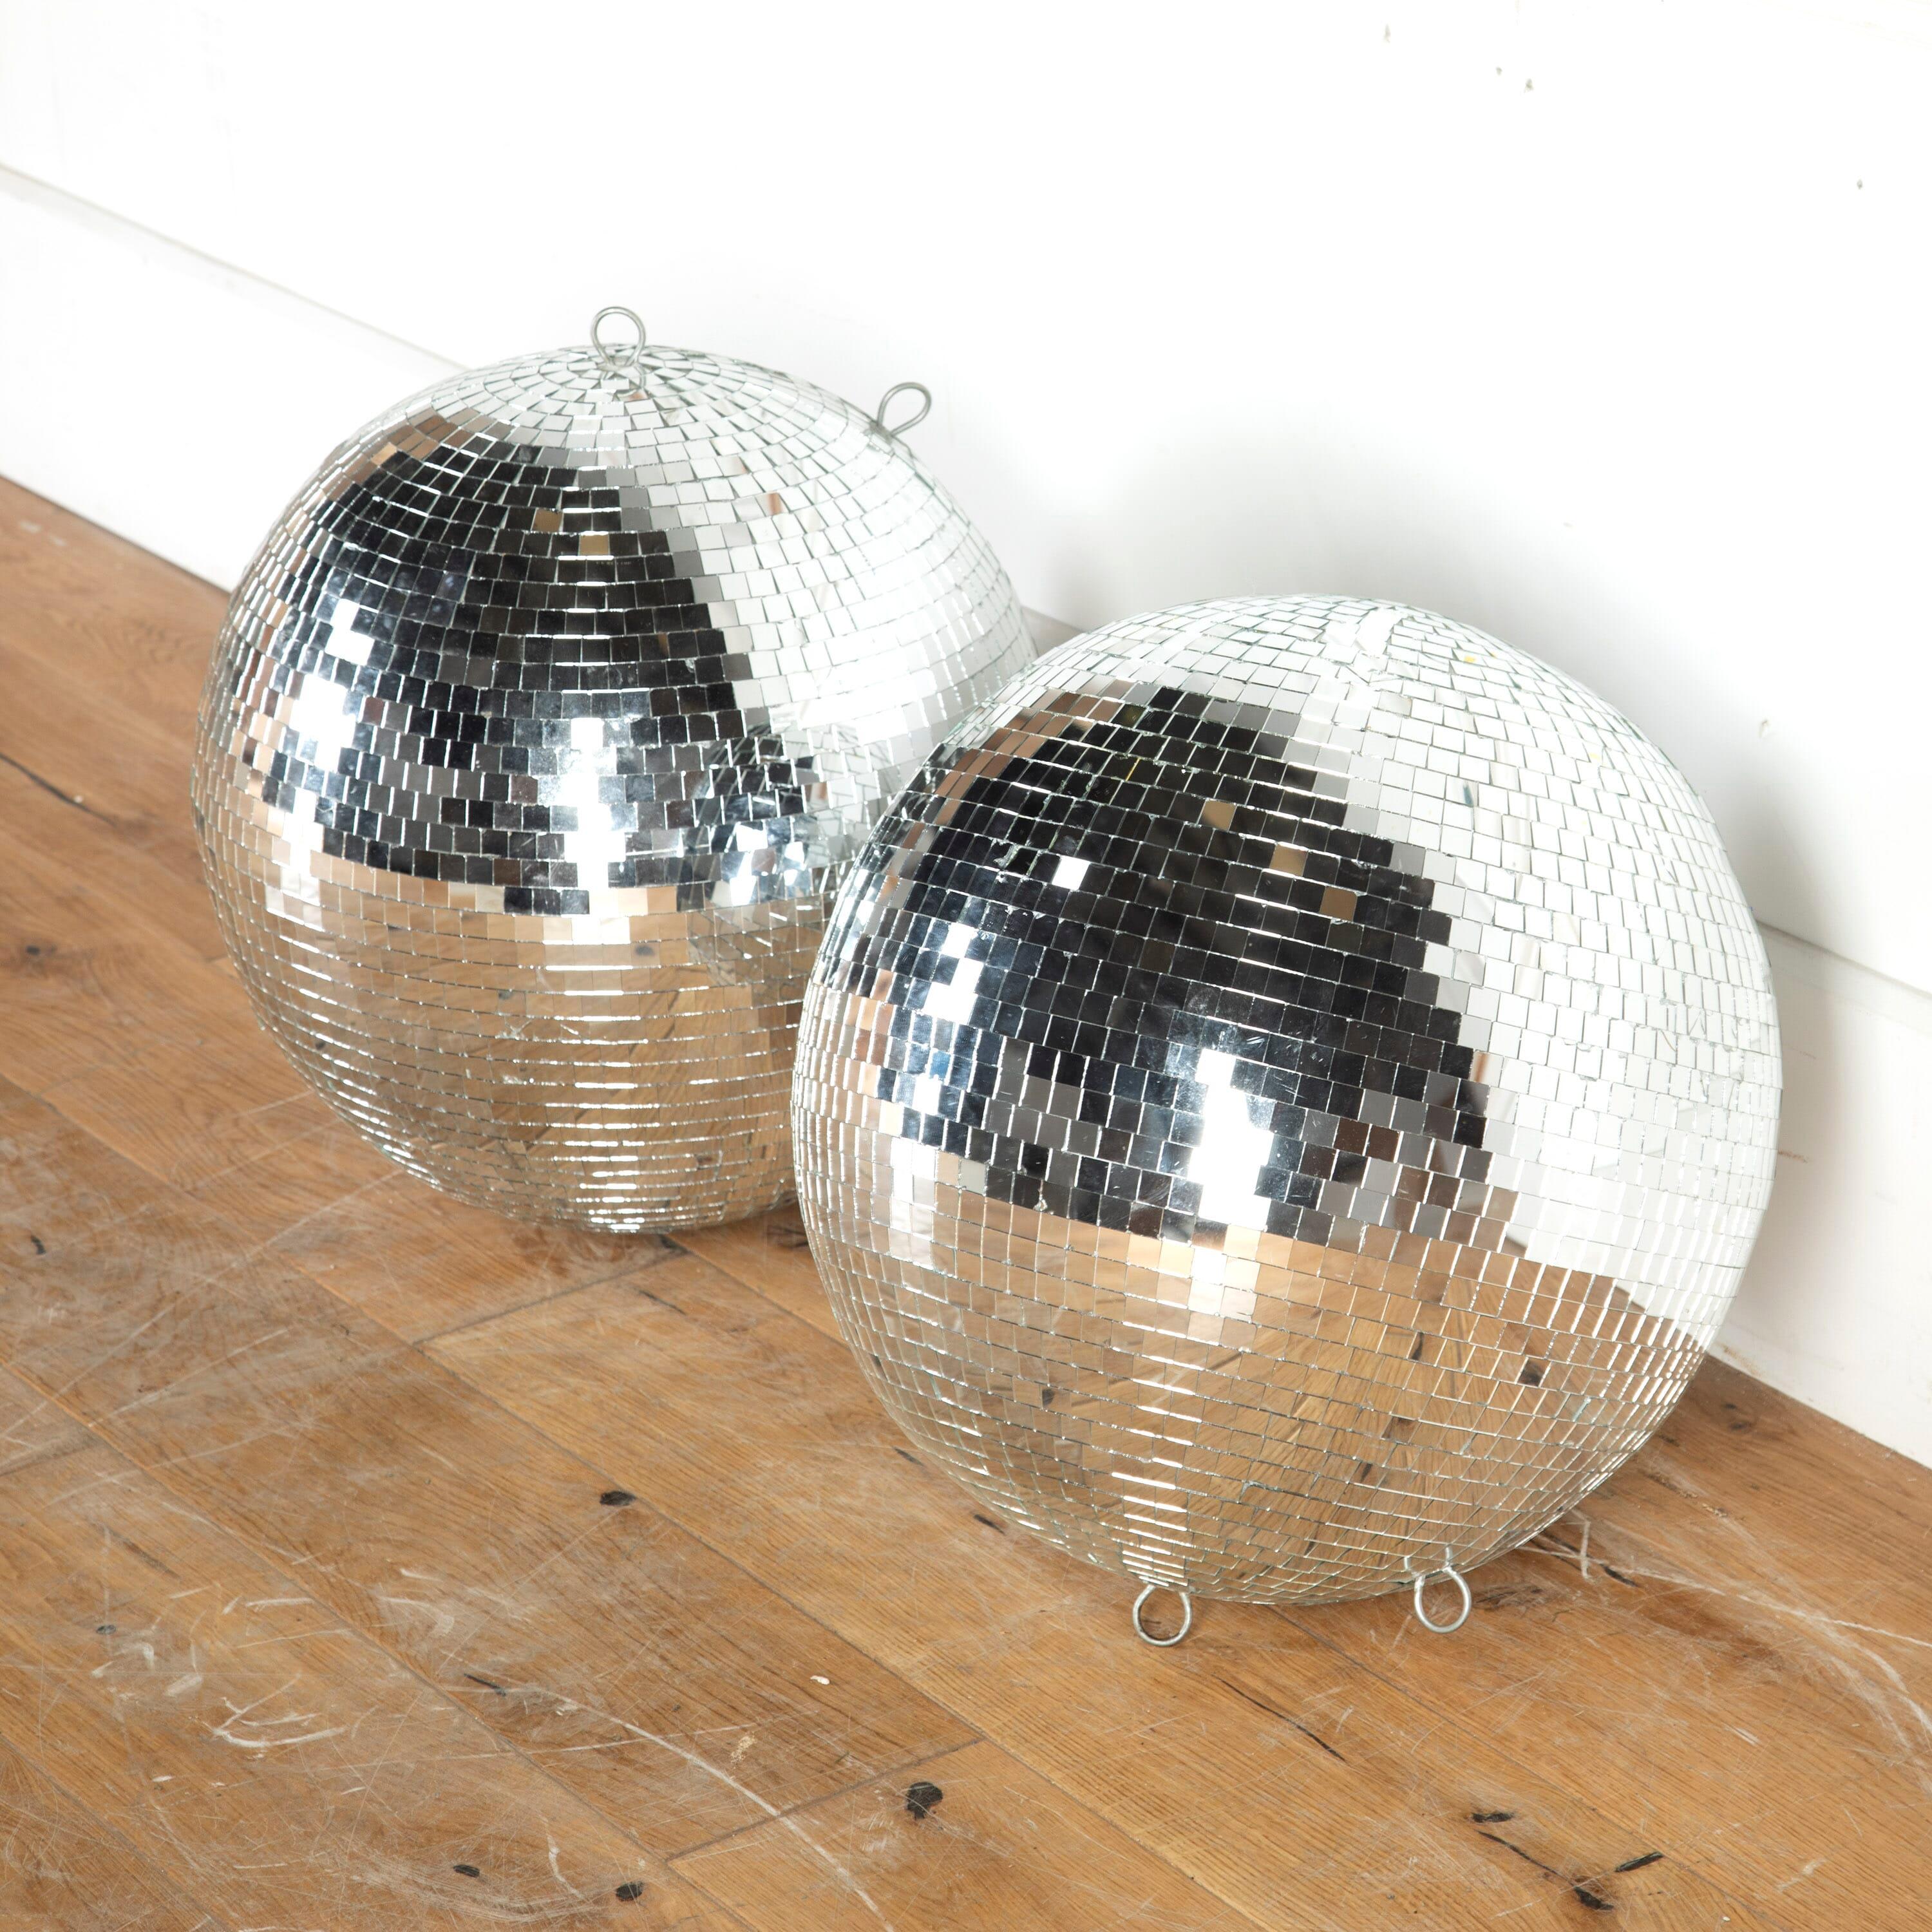 Funky pair of original 1970s nightclub mirrored disco balls. 

These disco balls will evoke all the fun of the 70s in an interior and have a wonderful reflective quality. 

They are in a fair condition commensurate with their age; no losses, but